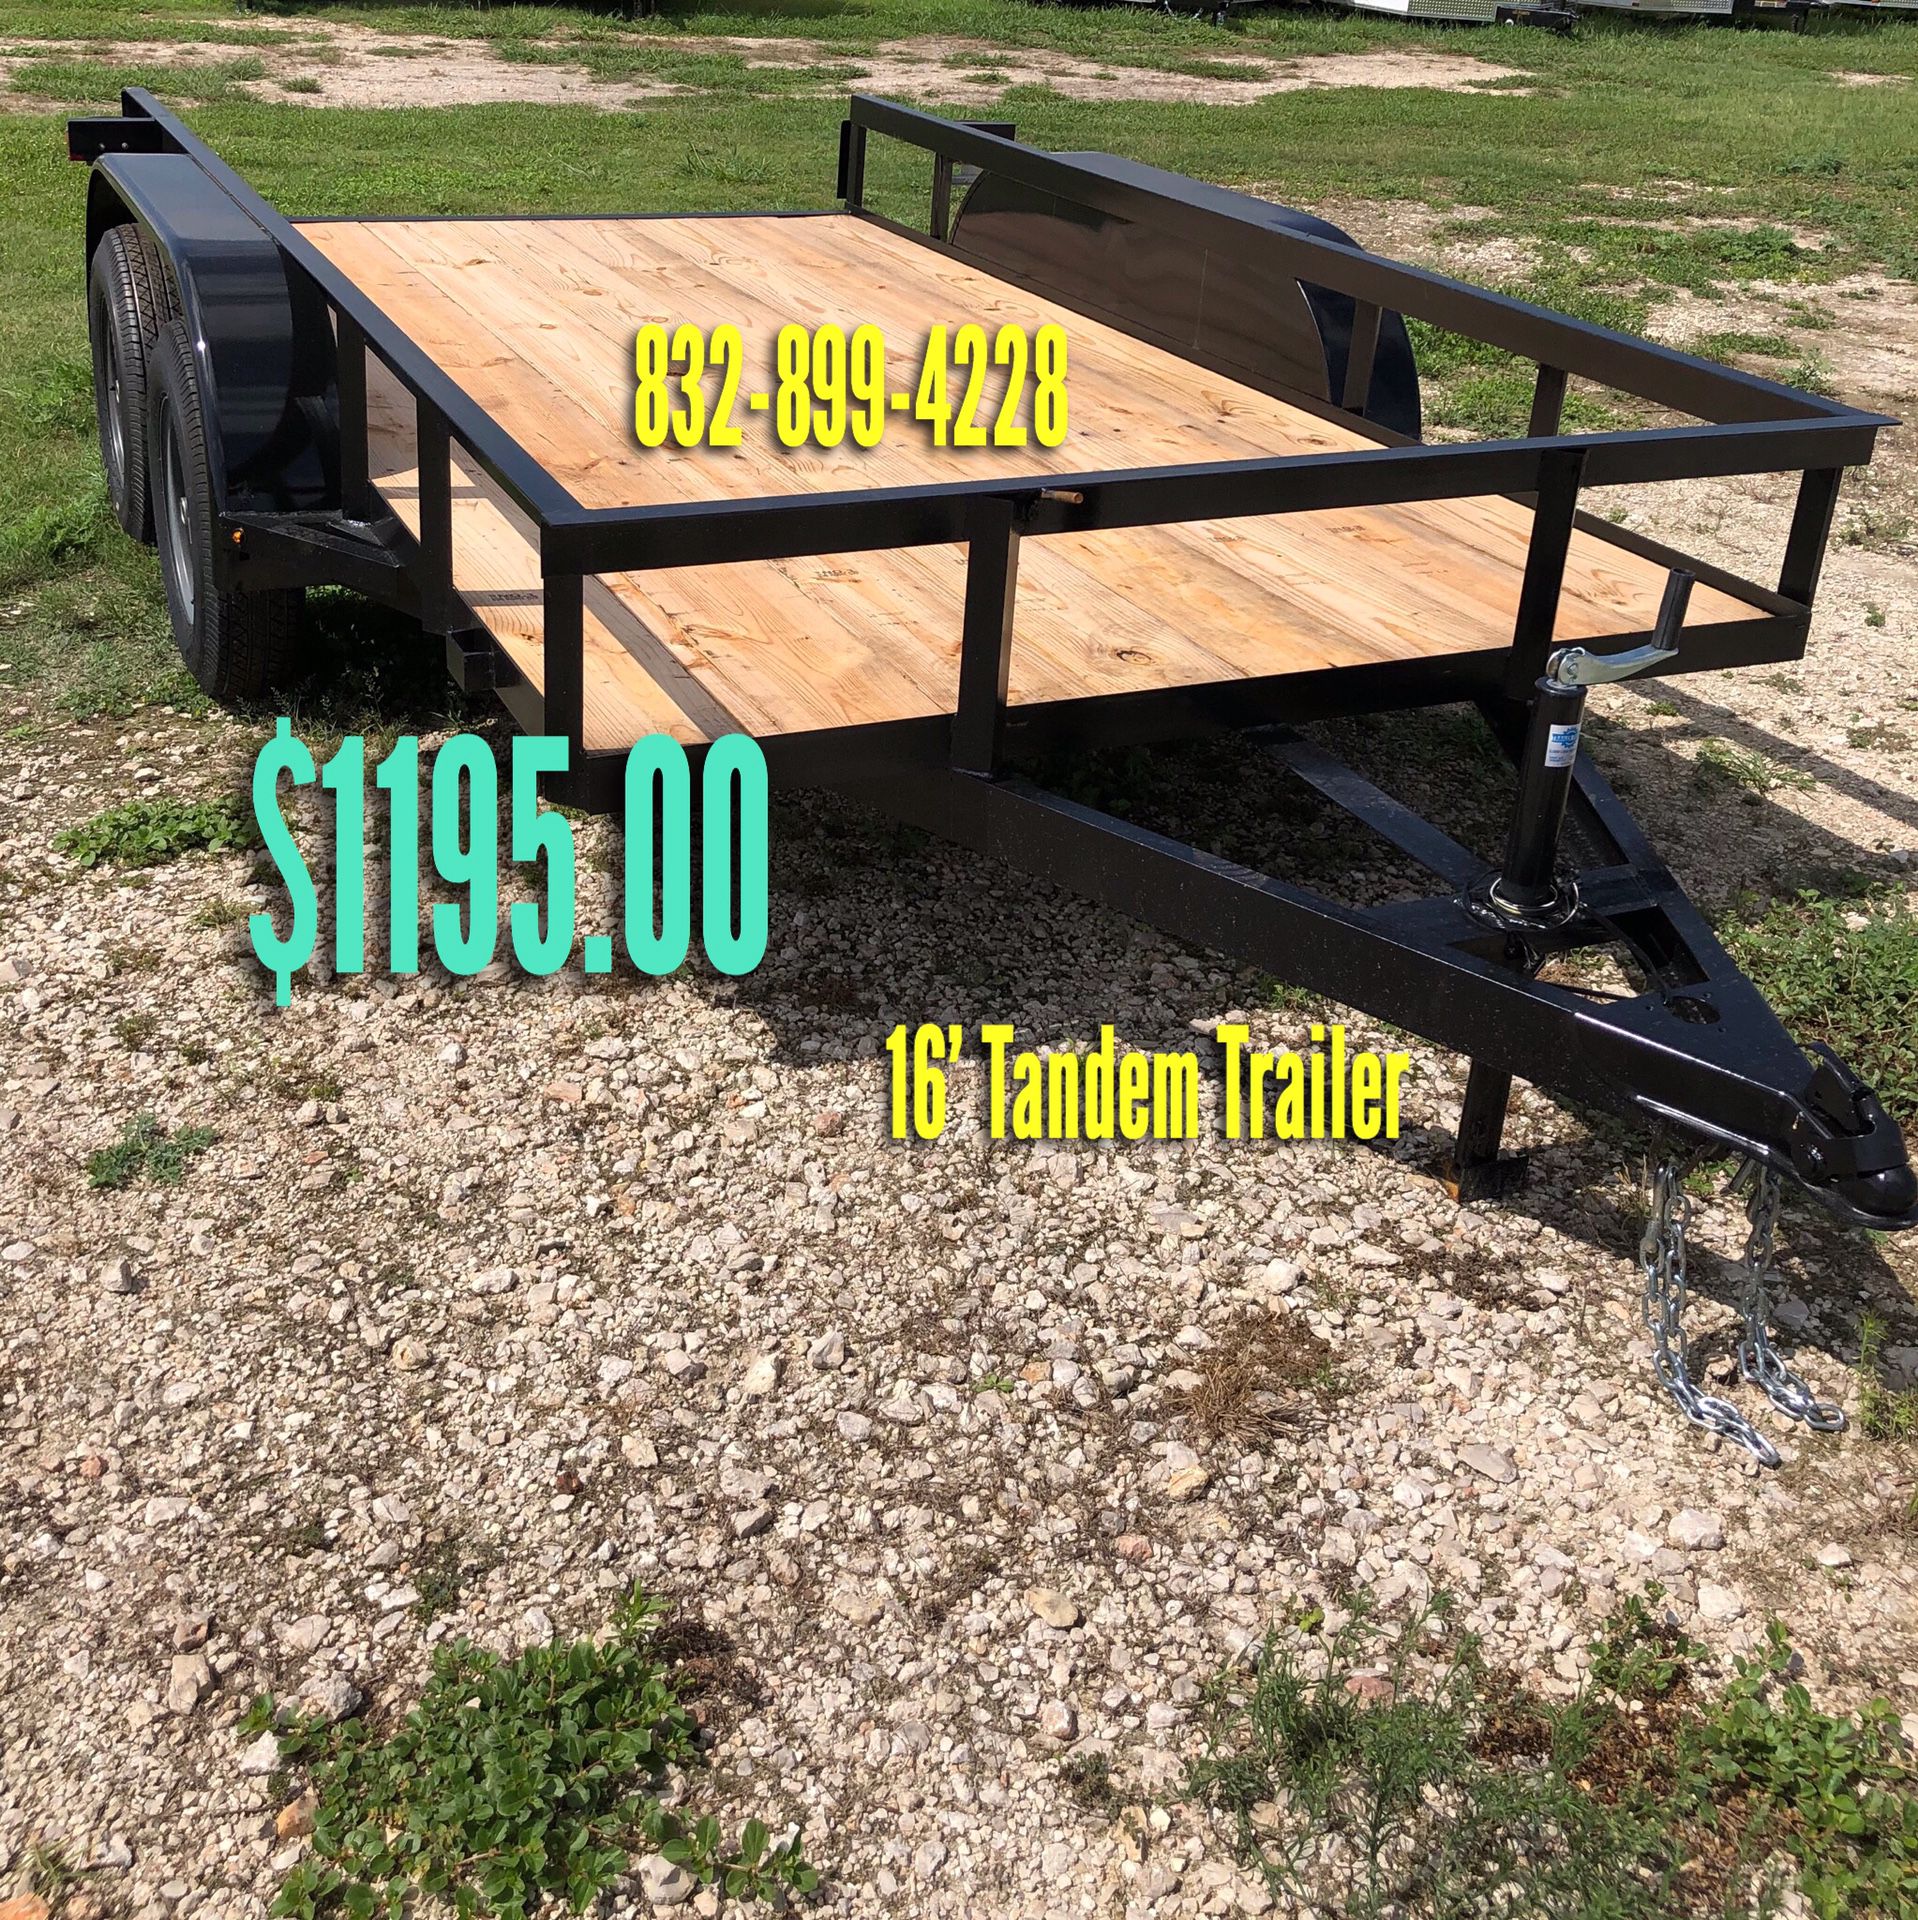 Trailers For Sale - 16’ Tandem Trailer